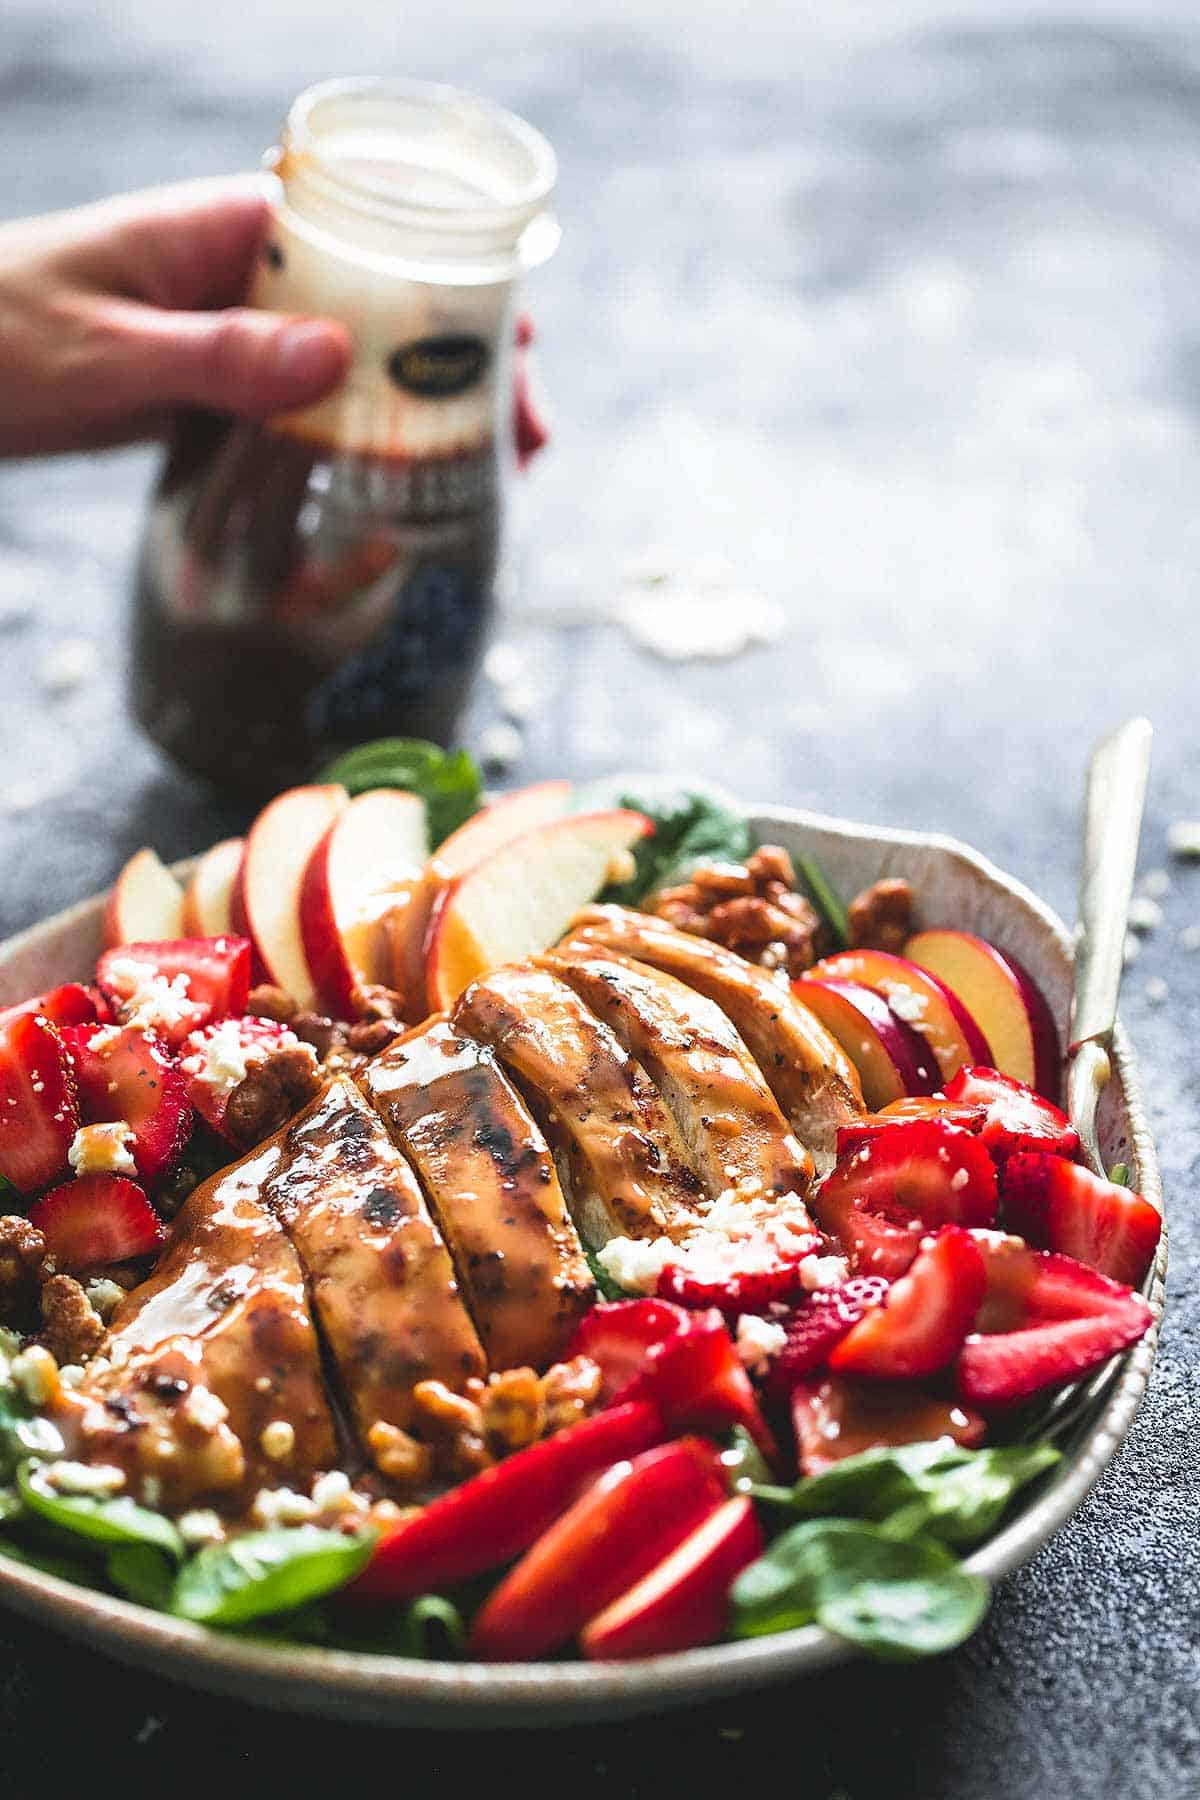 balsamic chicken, strawberry, and apple salad and a fork on a plate with a hand holding a jar of balsamic dressing in the background.